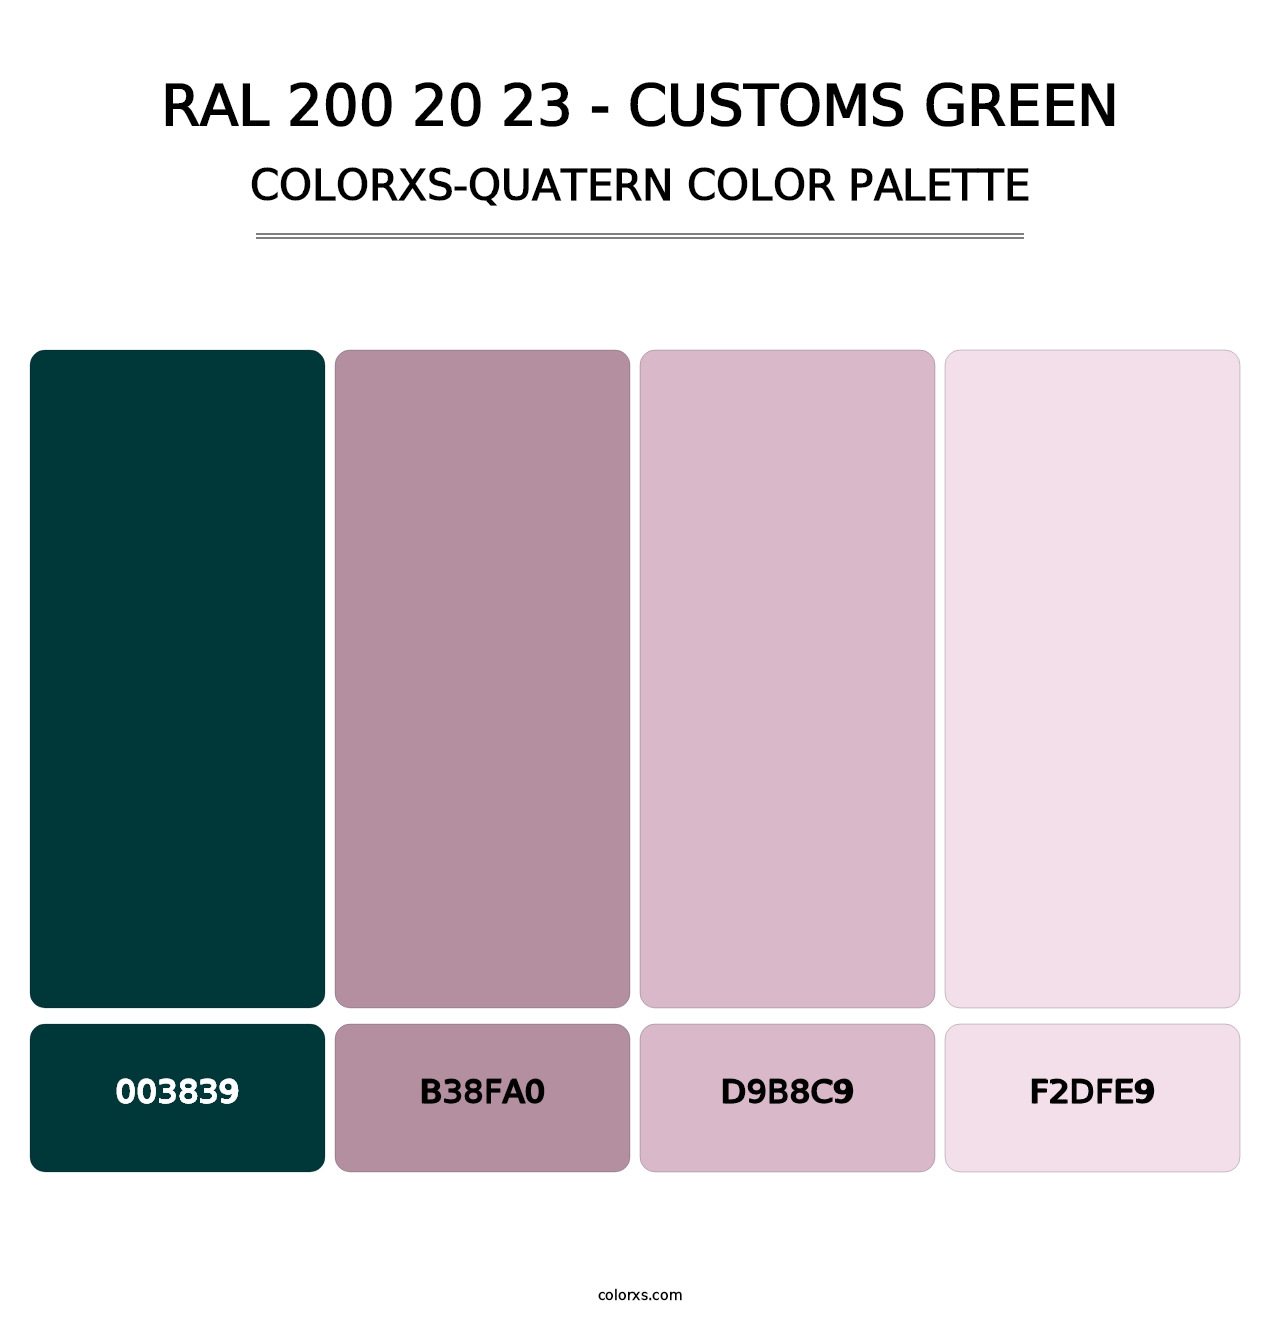 RAL 200 20 23 - Customs Green - Colorxs Quatern Palette